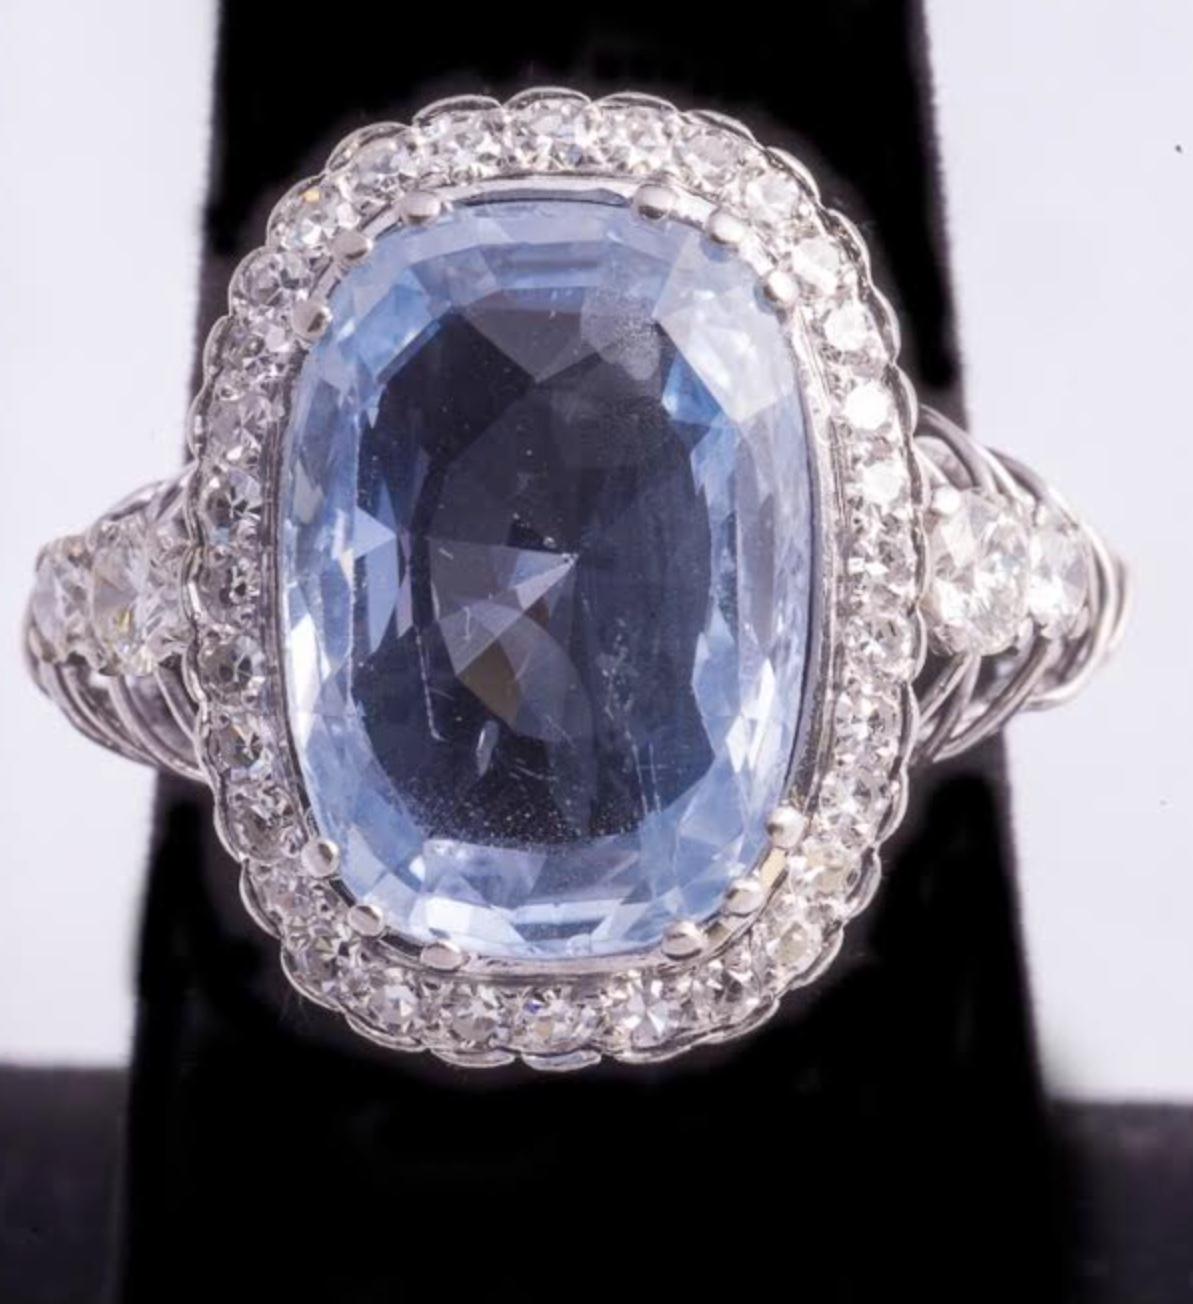 Sapphire and Diamond Ring featuring an 8 Carat Unheated/Untreated Ceylon Sapphire in a Platinum Setting surrounded with 1.24 Full and Half Cut Diamonds